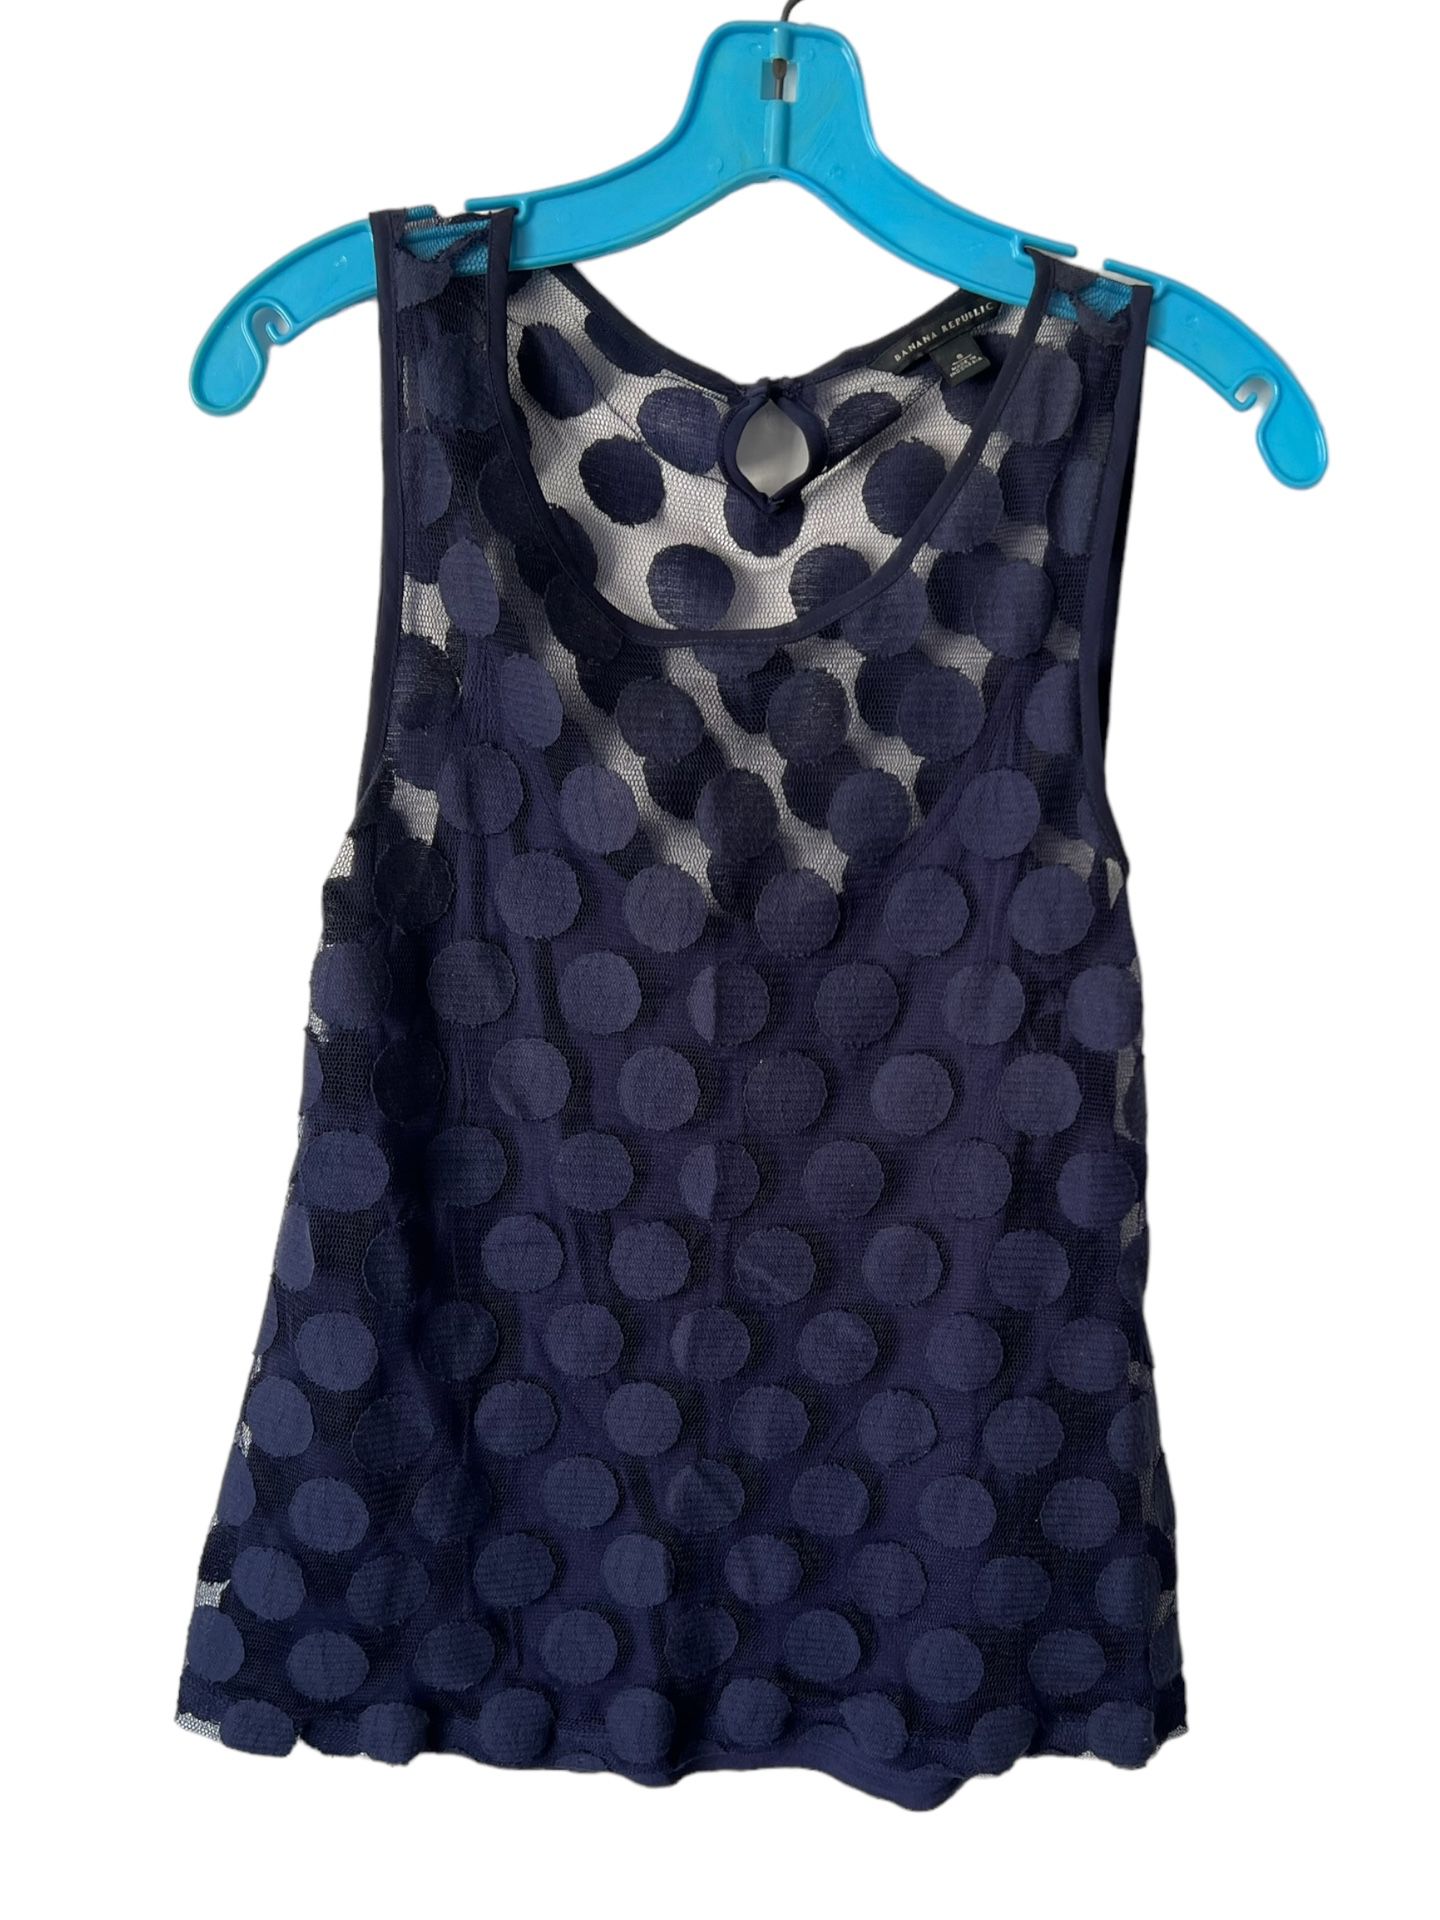 Banana Republic Royal Blue Lace Tank Textured Circles  Small  Elevate your wardrobe with this stunning Banana Republic Royal Blue Lace Tank. The intri